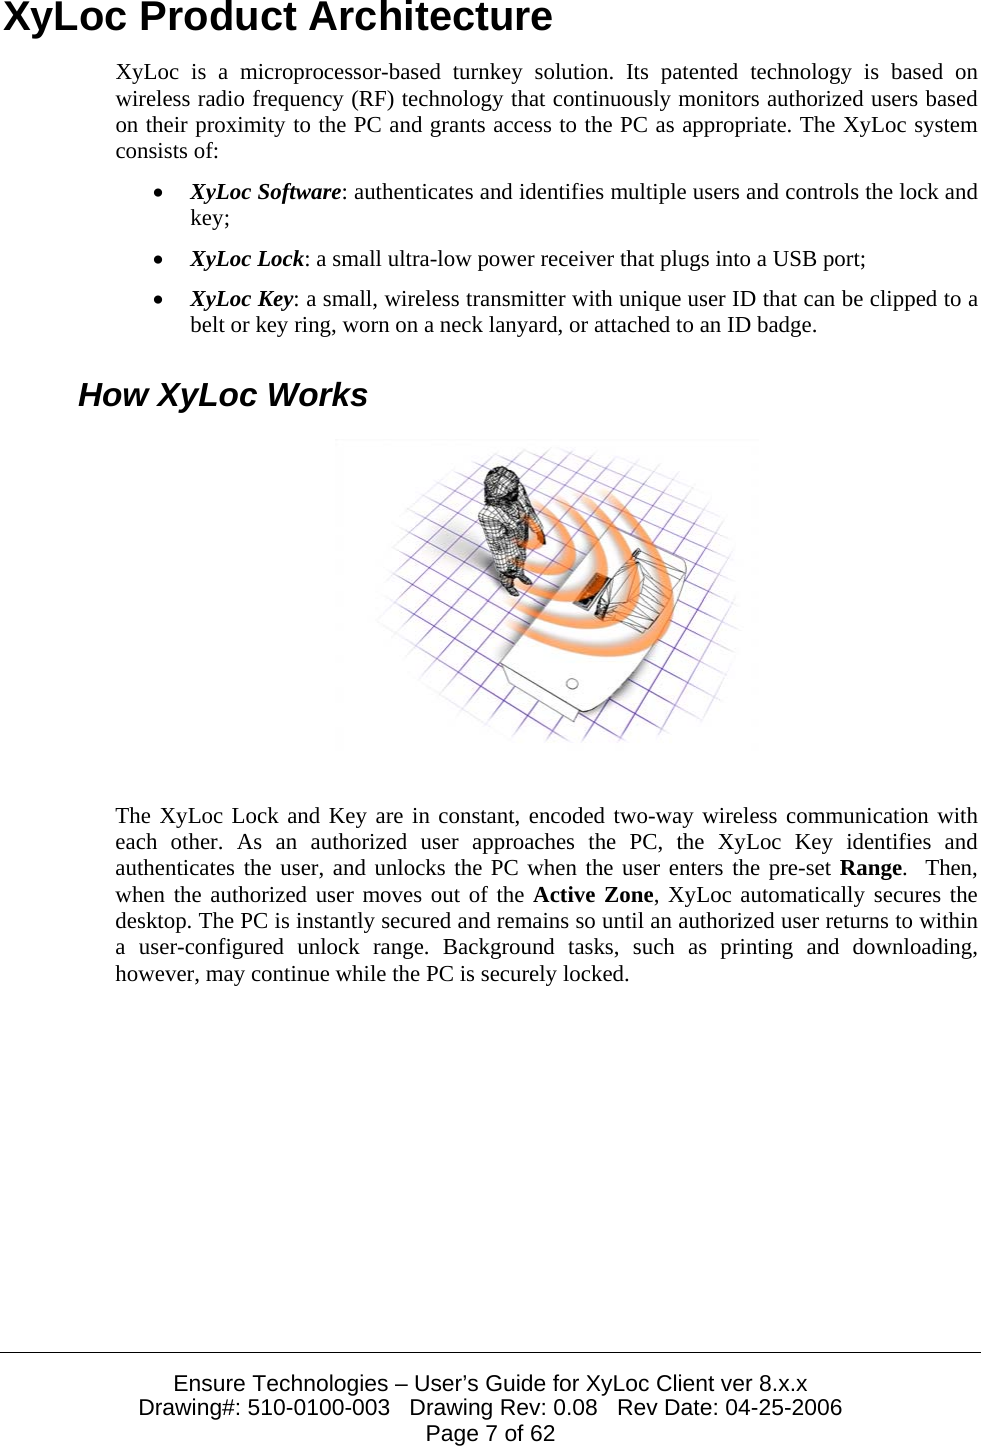  Ensure Technologies – User’s Guide for XyLoc Client ver 8.x.x Drawing#: 510-0100-003   Drawing Rev: 0.08   Rev Date: 04-25-2006 Page 7 of 62 XyLoc Product Architecture XyLoc is a microprocessor-based turnkey solution. Its patented technology is based on wireless radio frequency (RF) technology that continuously monitors authorized users based on their proximity to the PC and grants access to the PC as appropriate. The XyLoc system consists of: • XyLoc Software: authenticates and identifies multiple users and controls the lock and key; • XyLoc Lock: a small ultra-low power receiver that plugs into a USB port;  • XyLoc Key: a small, wireless transmitter with unique user ID that can be clipped to a belt or key ring, worn on a neck lanyard, or attached to an ID badge. How XyLoc Works   The XyLoc Lock and Key are in constant, encoded two-way wireless communication with each other. As an authorized user approaches the PC, the XyLoc Key identifies and authenticates the user, and unlocks the PC when the user enters the pre-set Range.  Then, when the authorized user moves out of the Active Zone, XyLoc automatically secures the desktop. The PC is instantly secured and remains so until an authorized user returns to within a user-configured unlock range. Background tasks, such as printing and downloading, however, may continue while the PC is securely locked.  